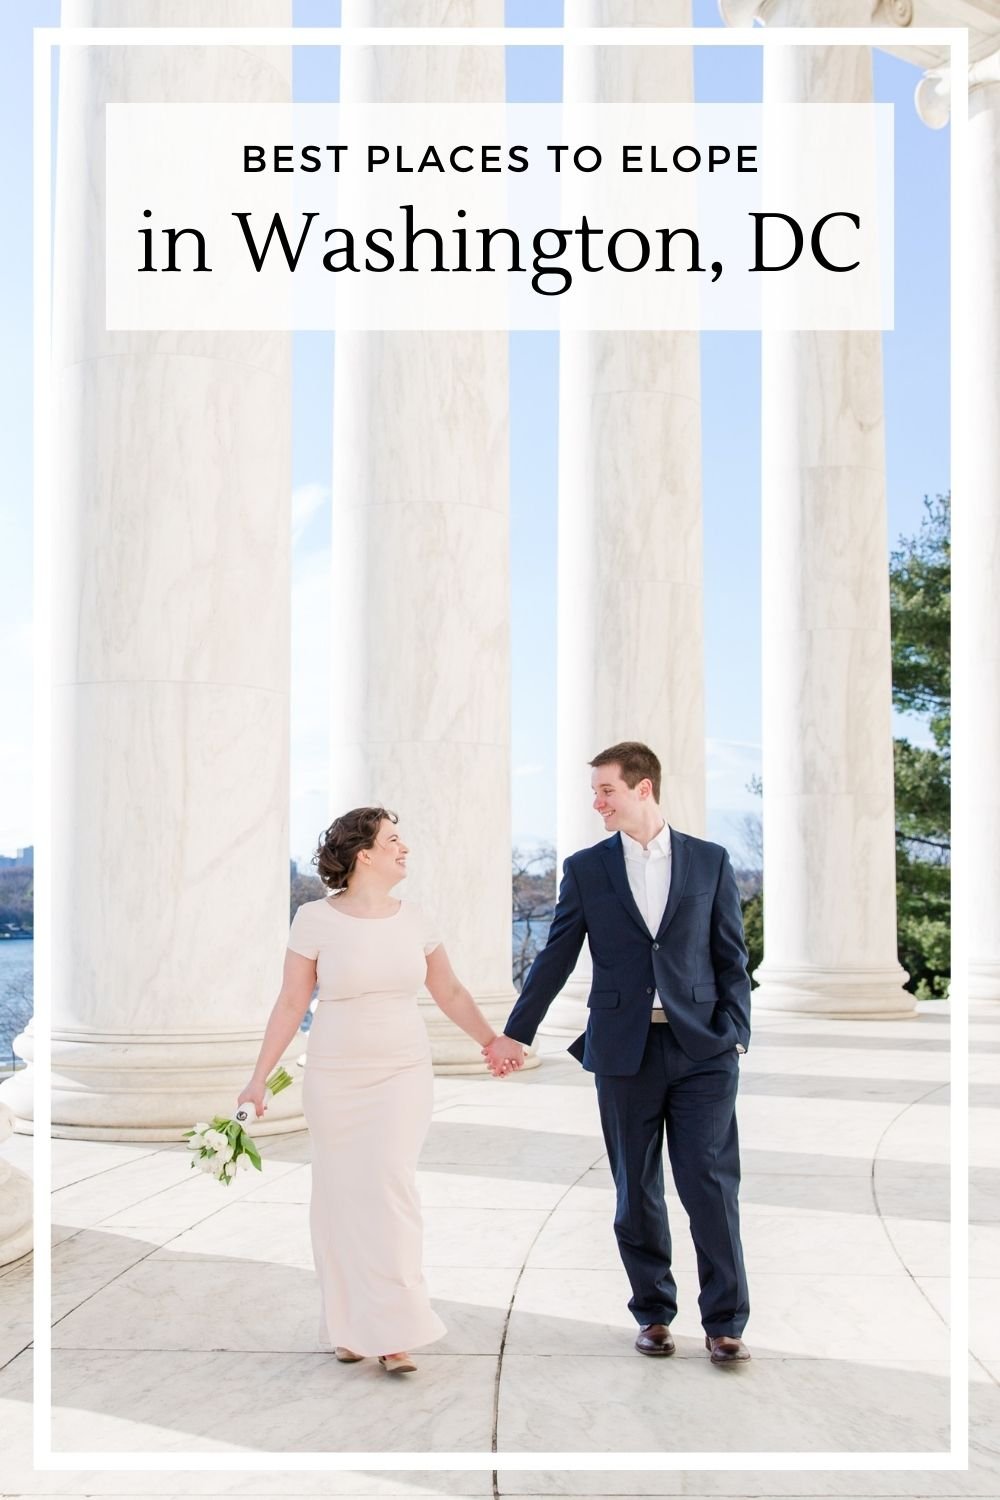 Best places to elope in DC